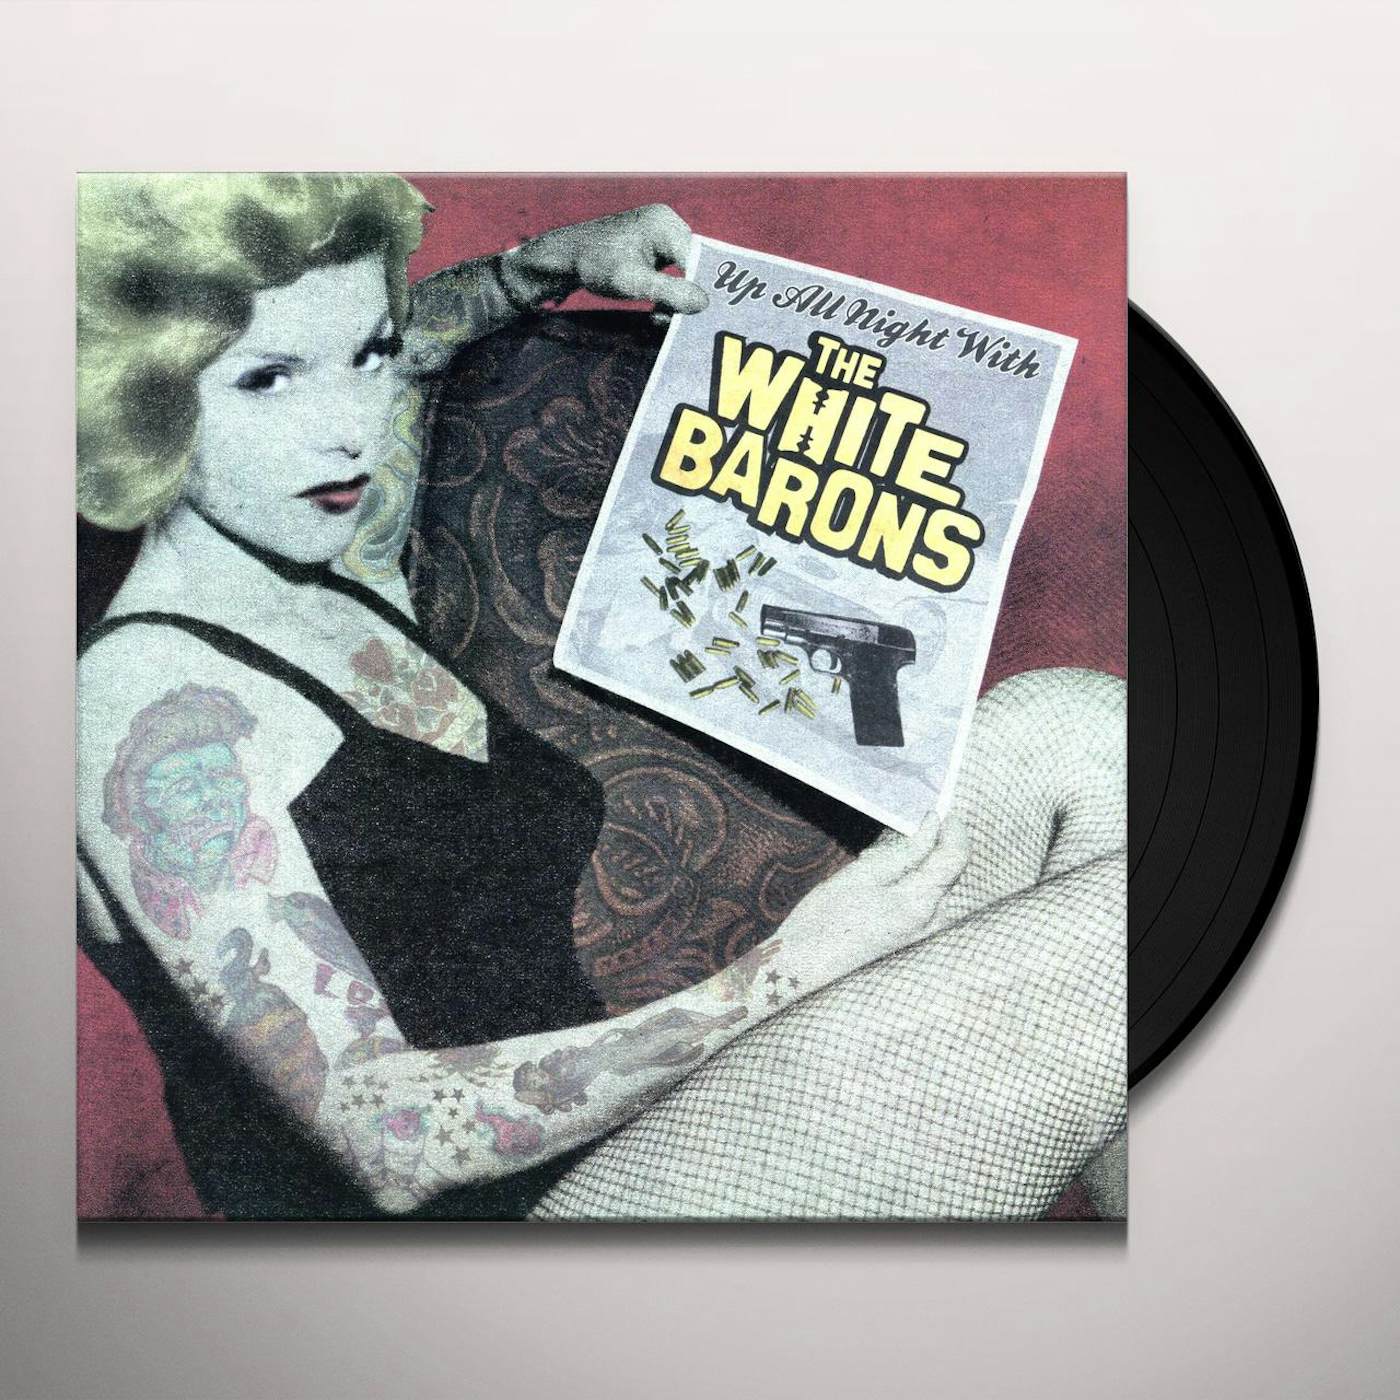 Up All Night With The White Barons Vinyl Record